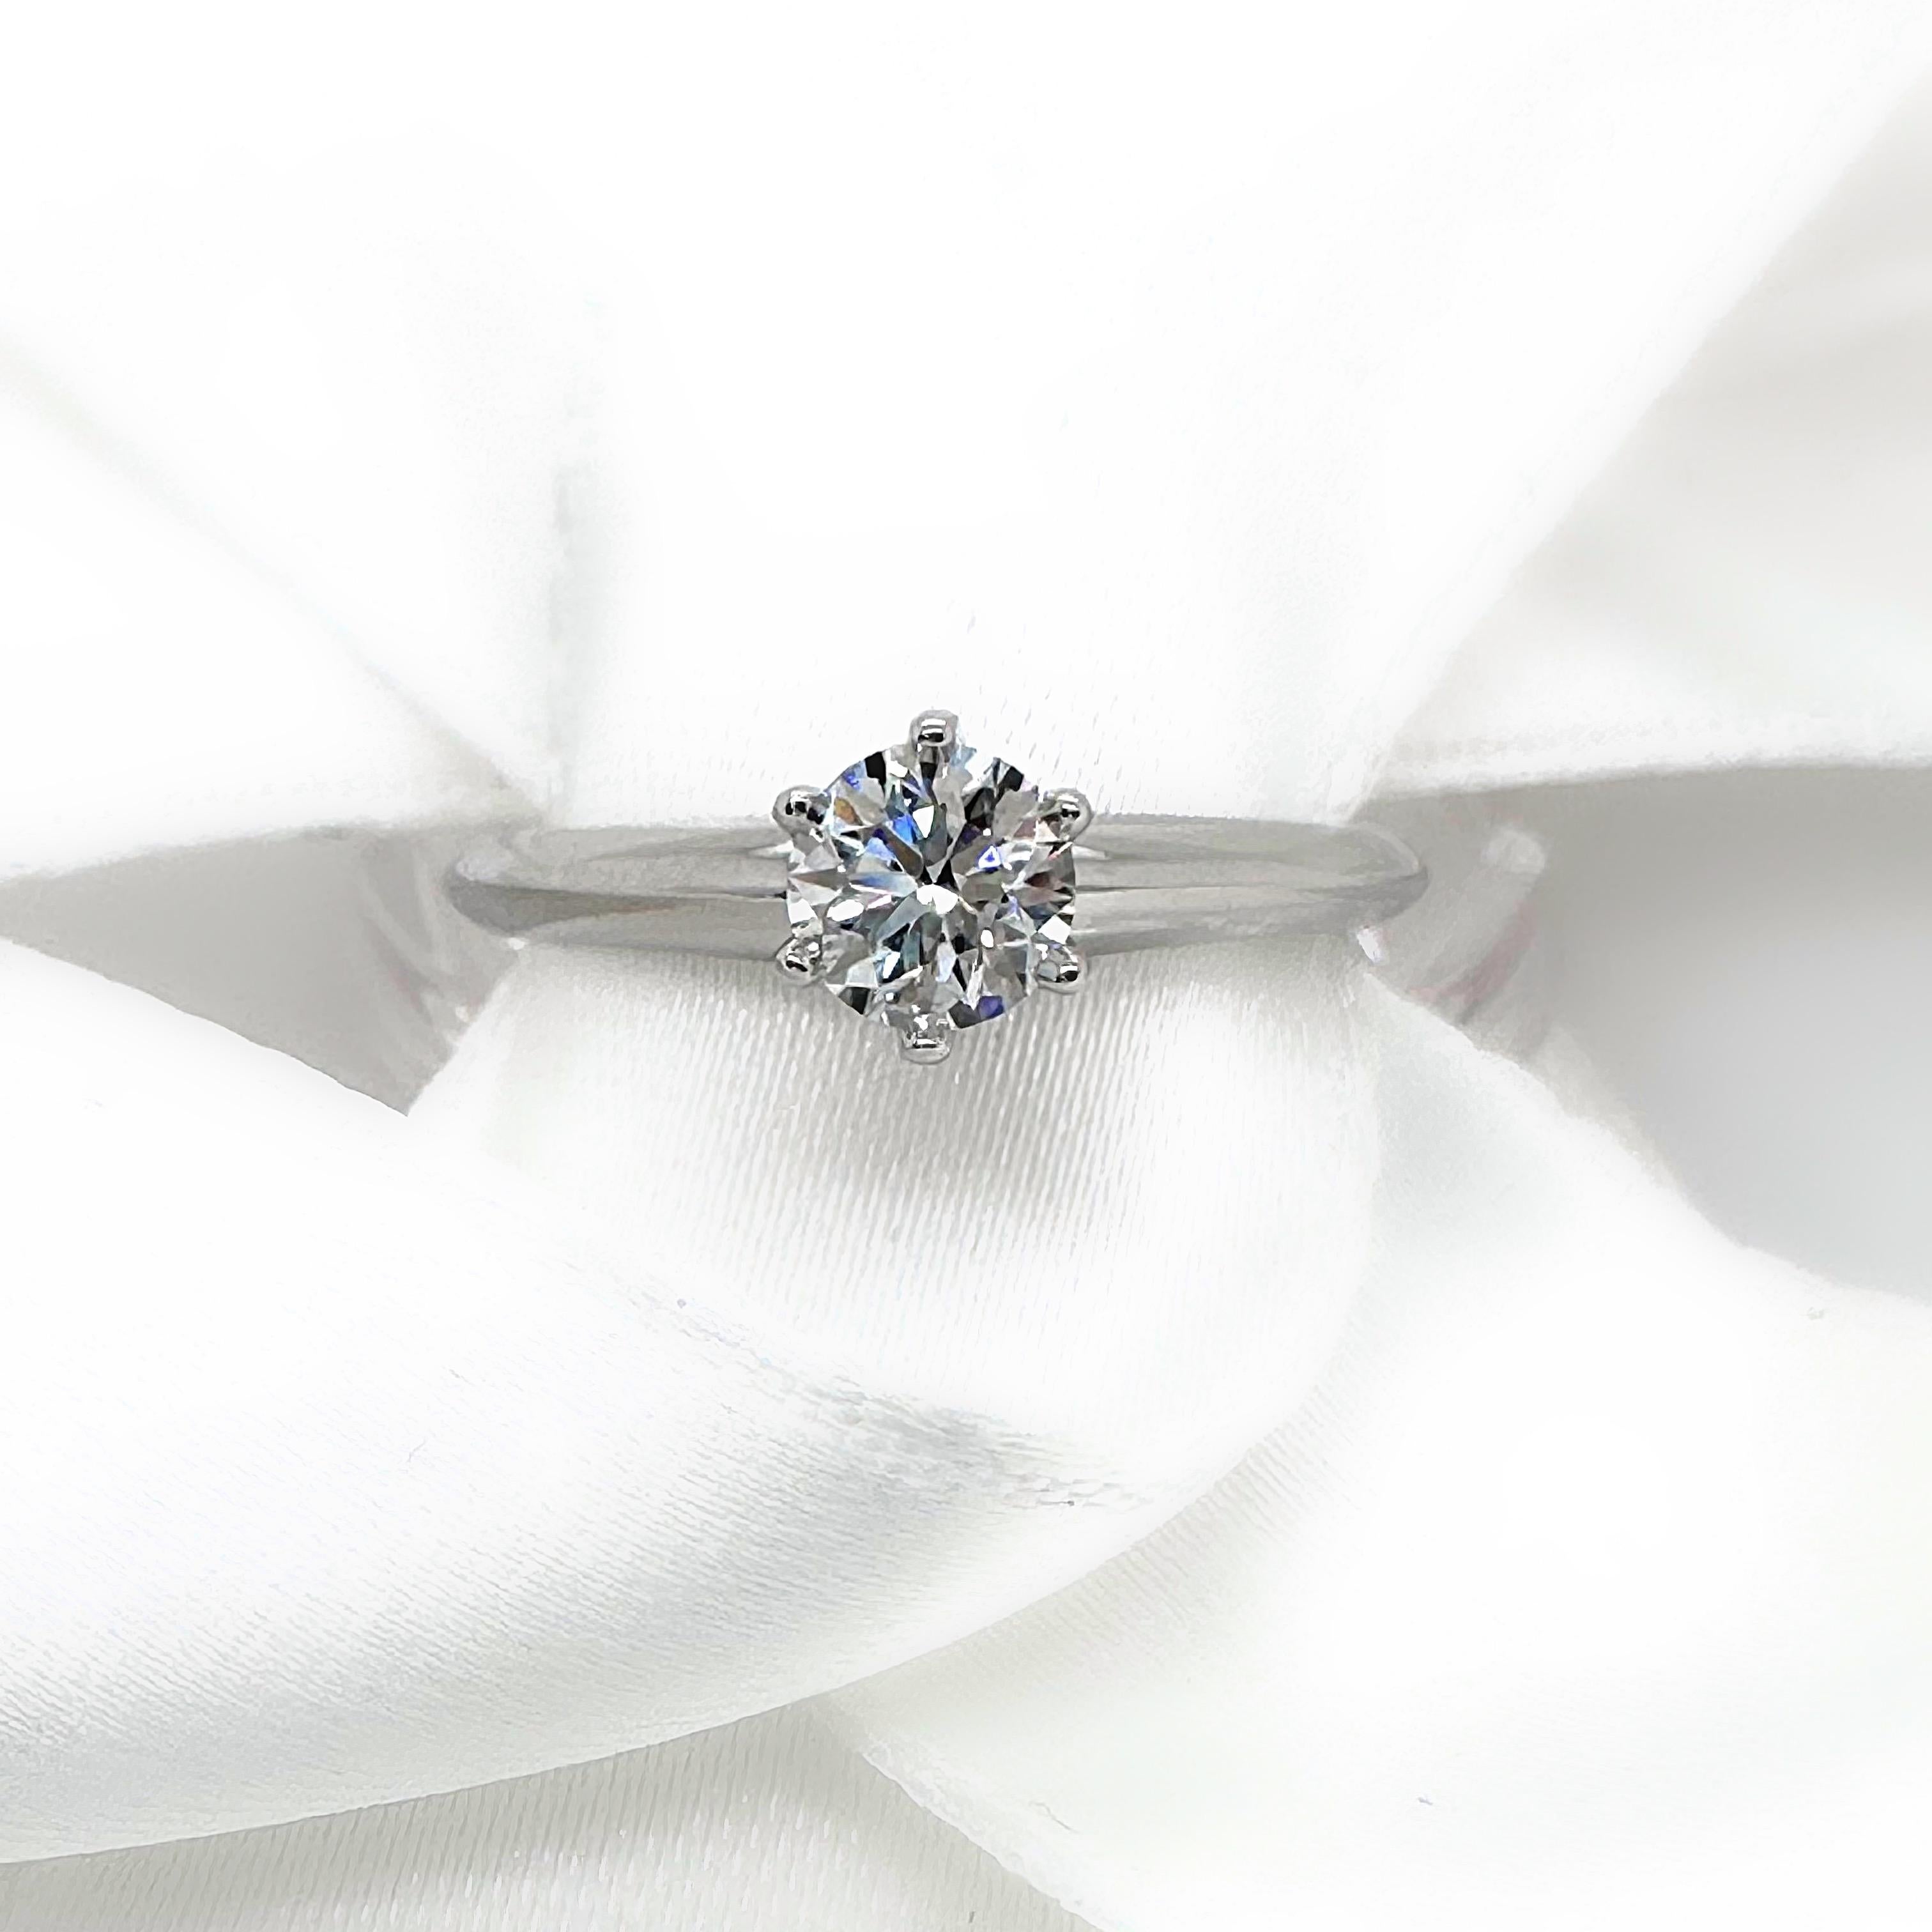 Tiffany & Co. Round Diamond 0.37 Cts F VVS1 Solitaire Engagement Ring Platinum For Sale 3